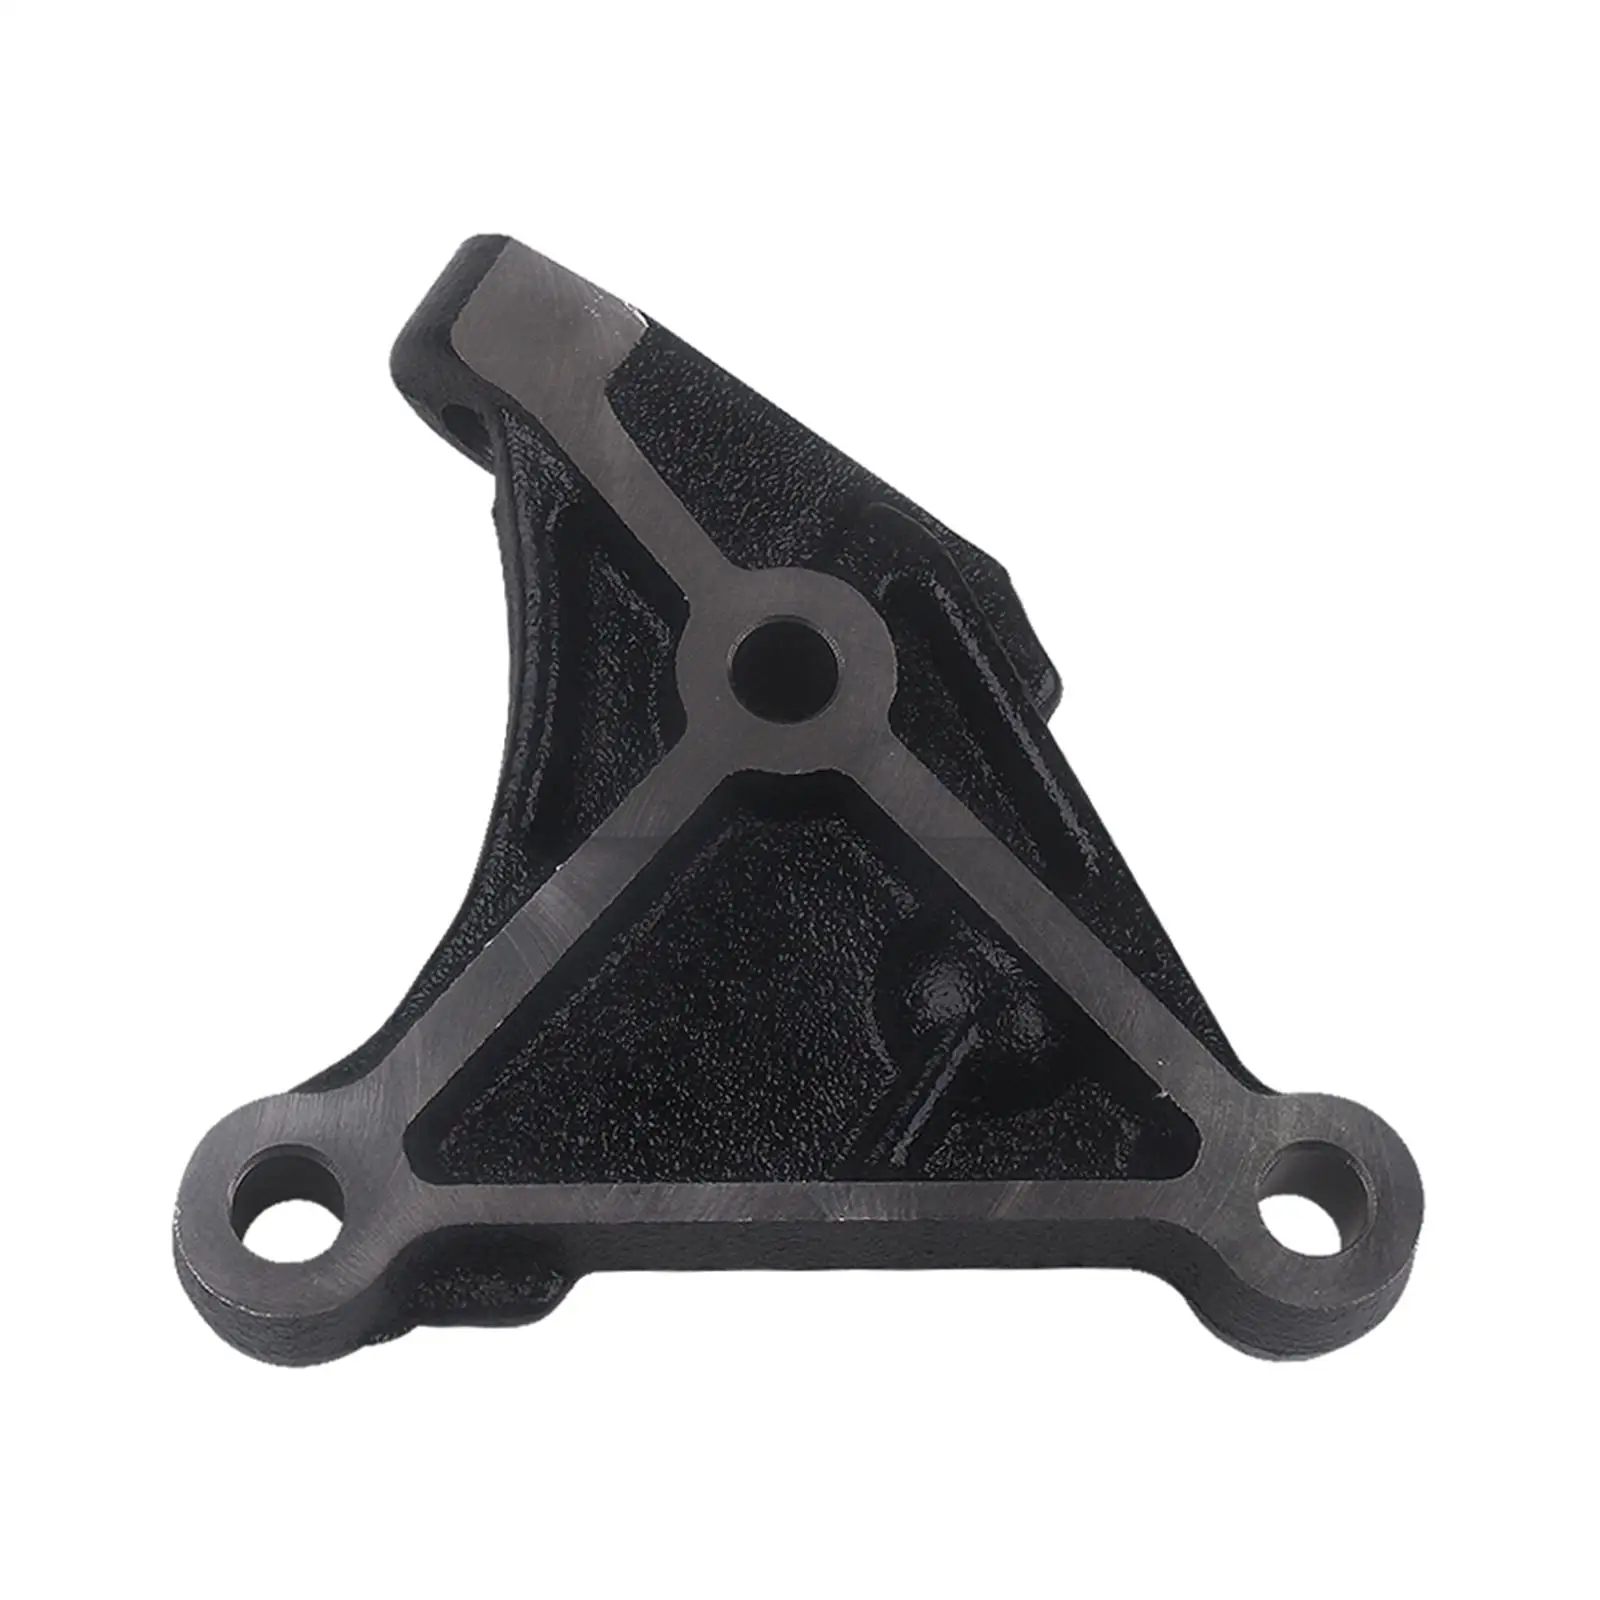 High Quality Metal Vehicle Conversion Engine Mount Adapter Replacement Car Repair Accessories